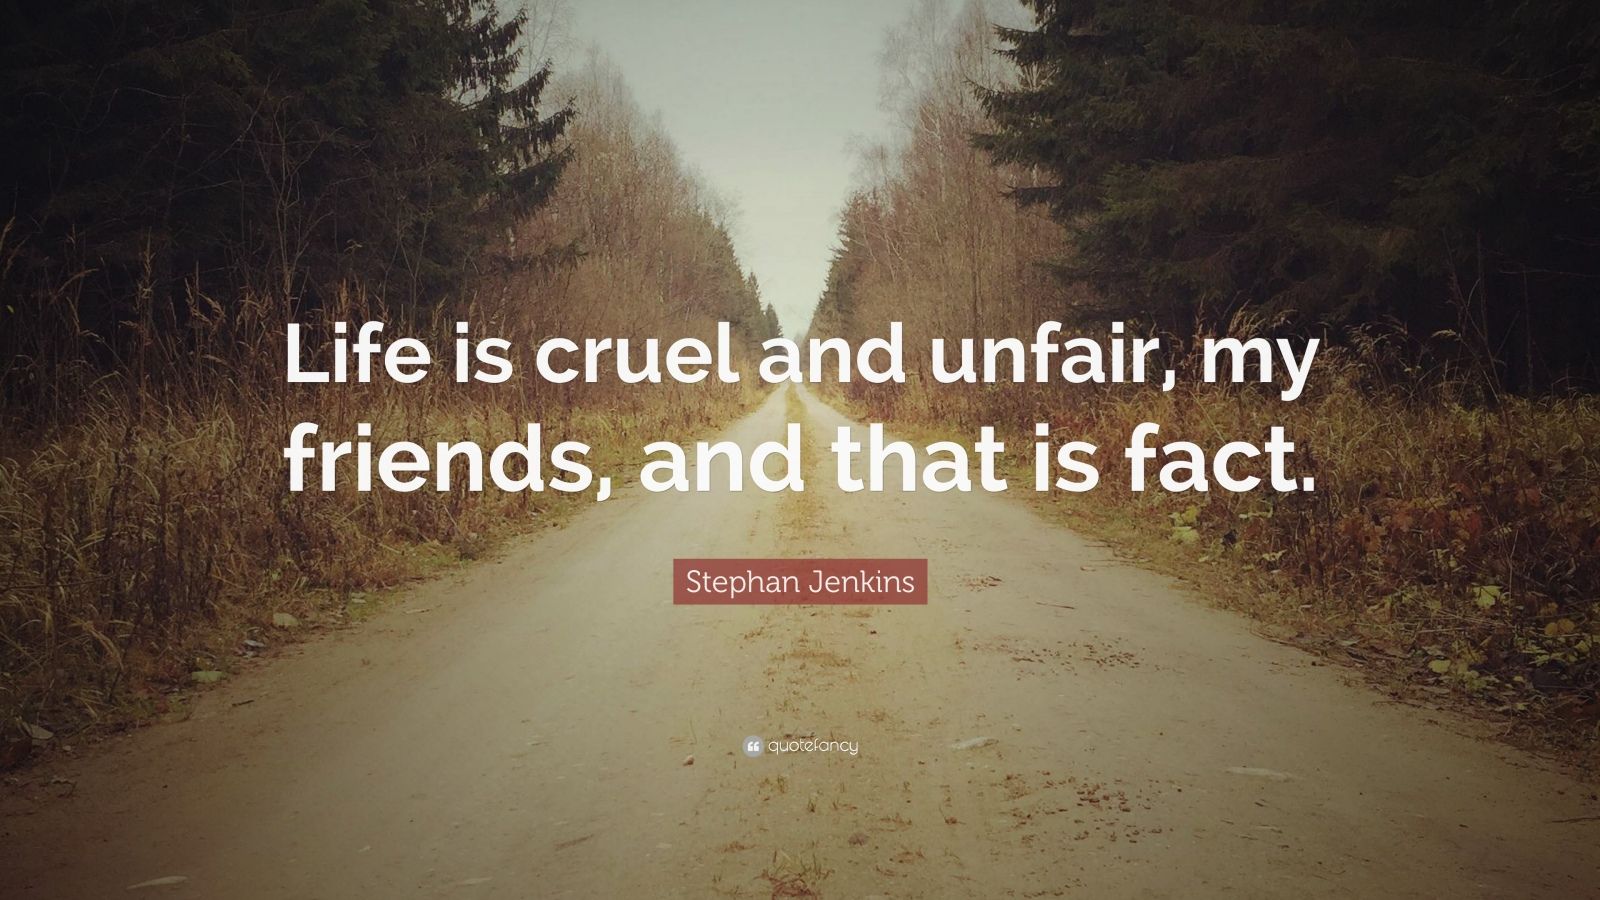 Stephan Jenkins Quote: “Life is cruel and unfair, my friends, and that